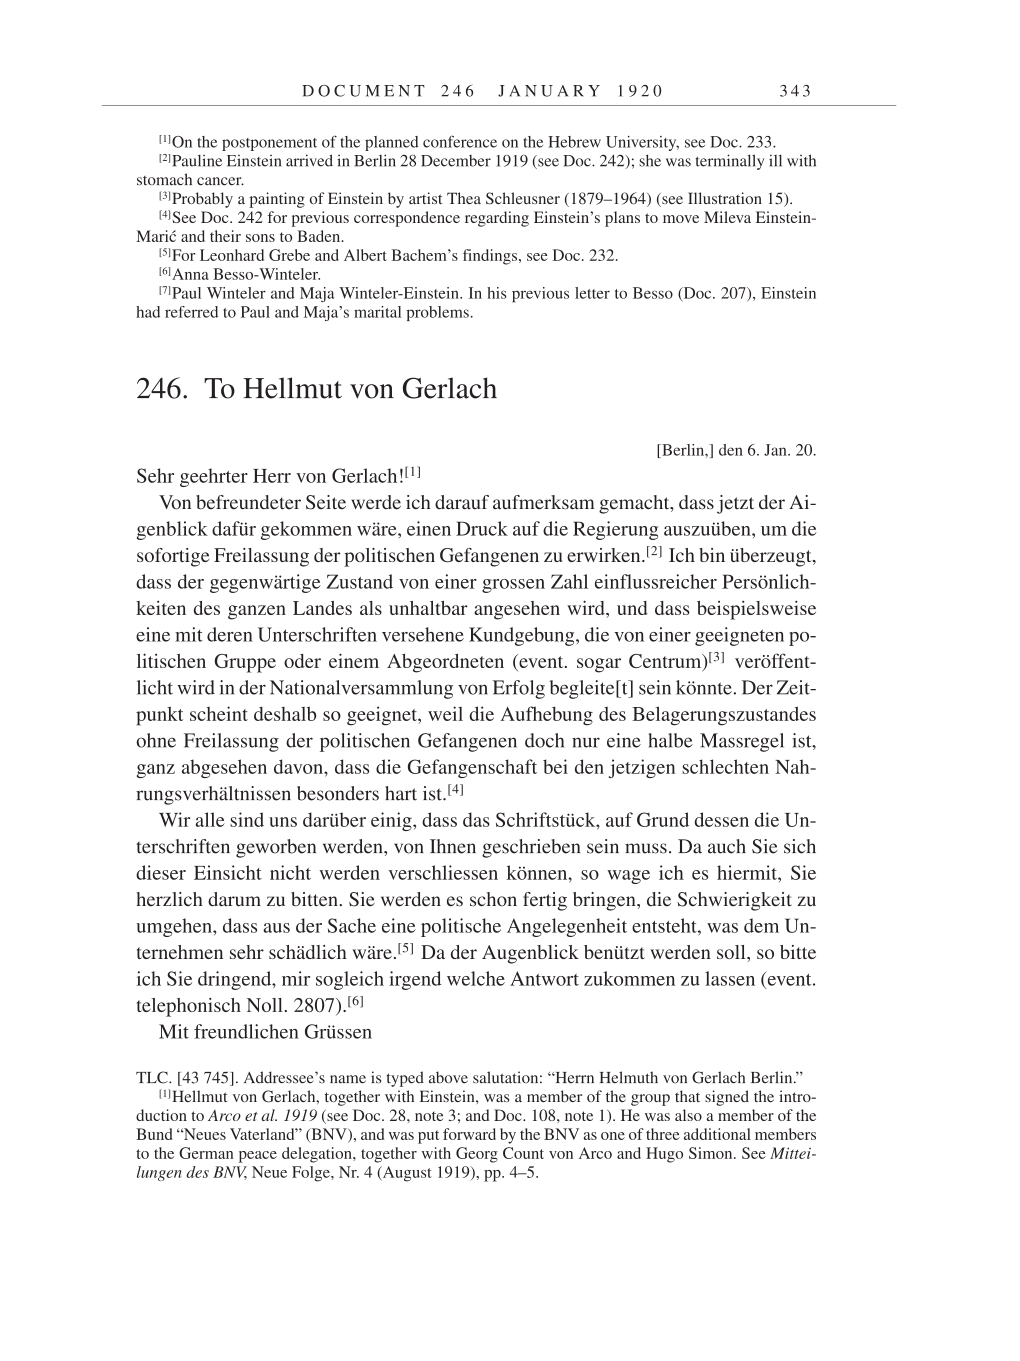 Volume 9: The Berlin Years: Correspondence January 1919-April 1920 page 343